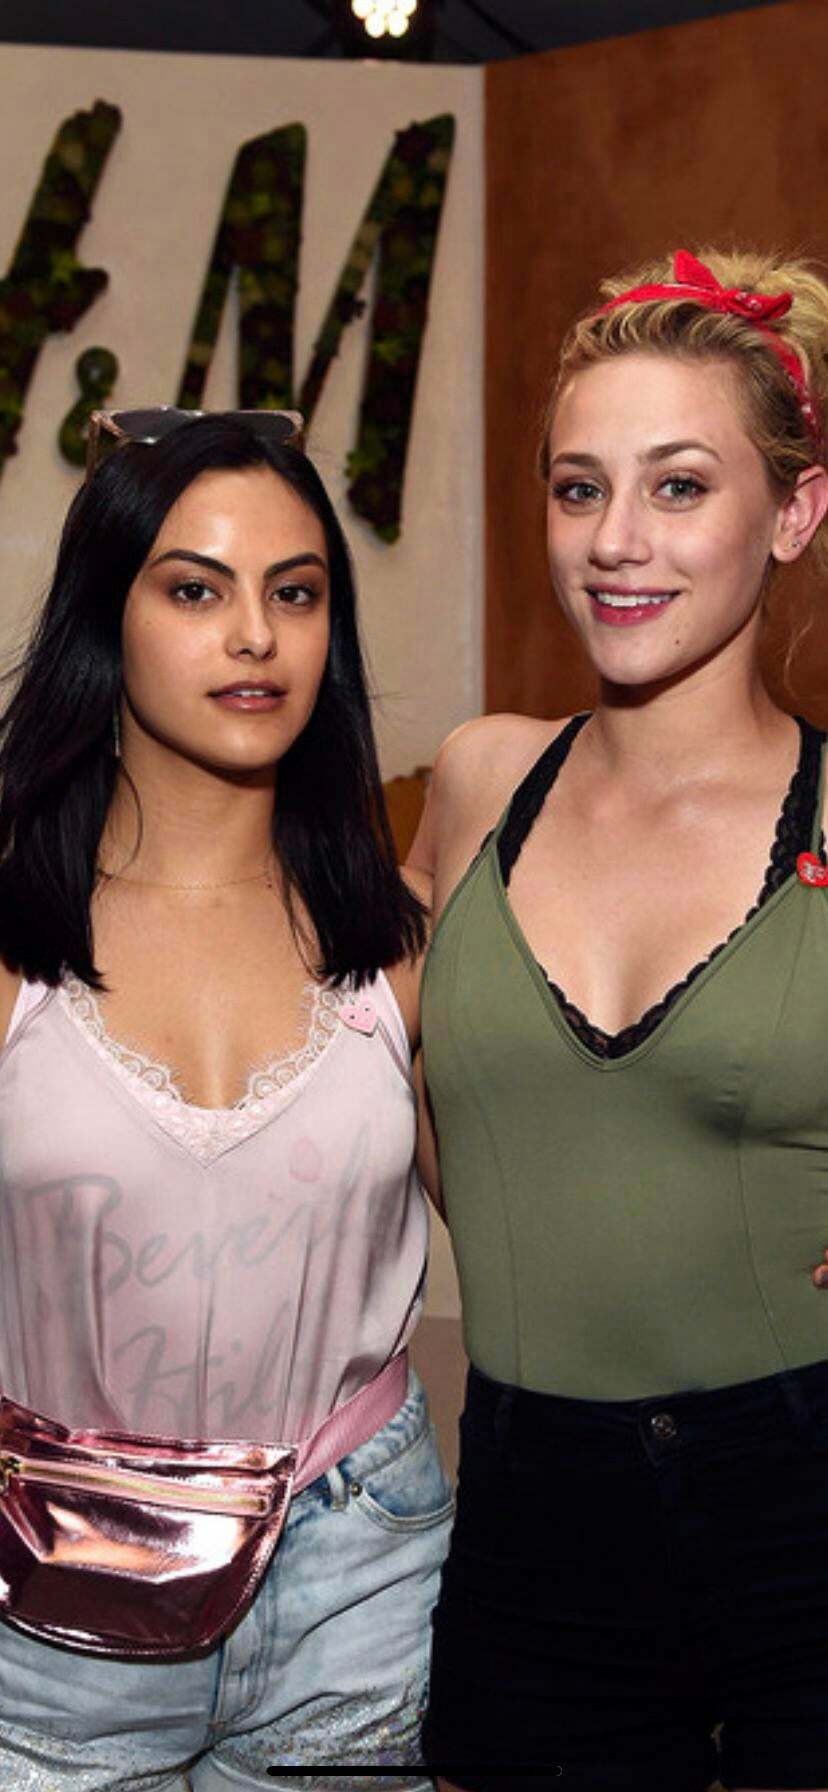 Camilla Mendes and Lili Reinhart, both could drain my cock with ease. Choose one to fuck in the pussy and one to fuck in the ass!